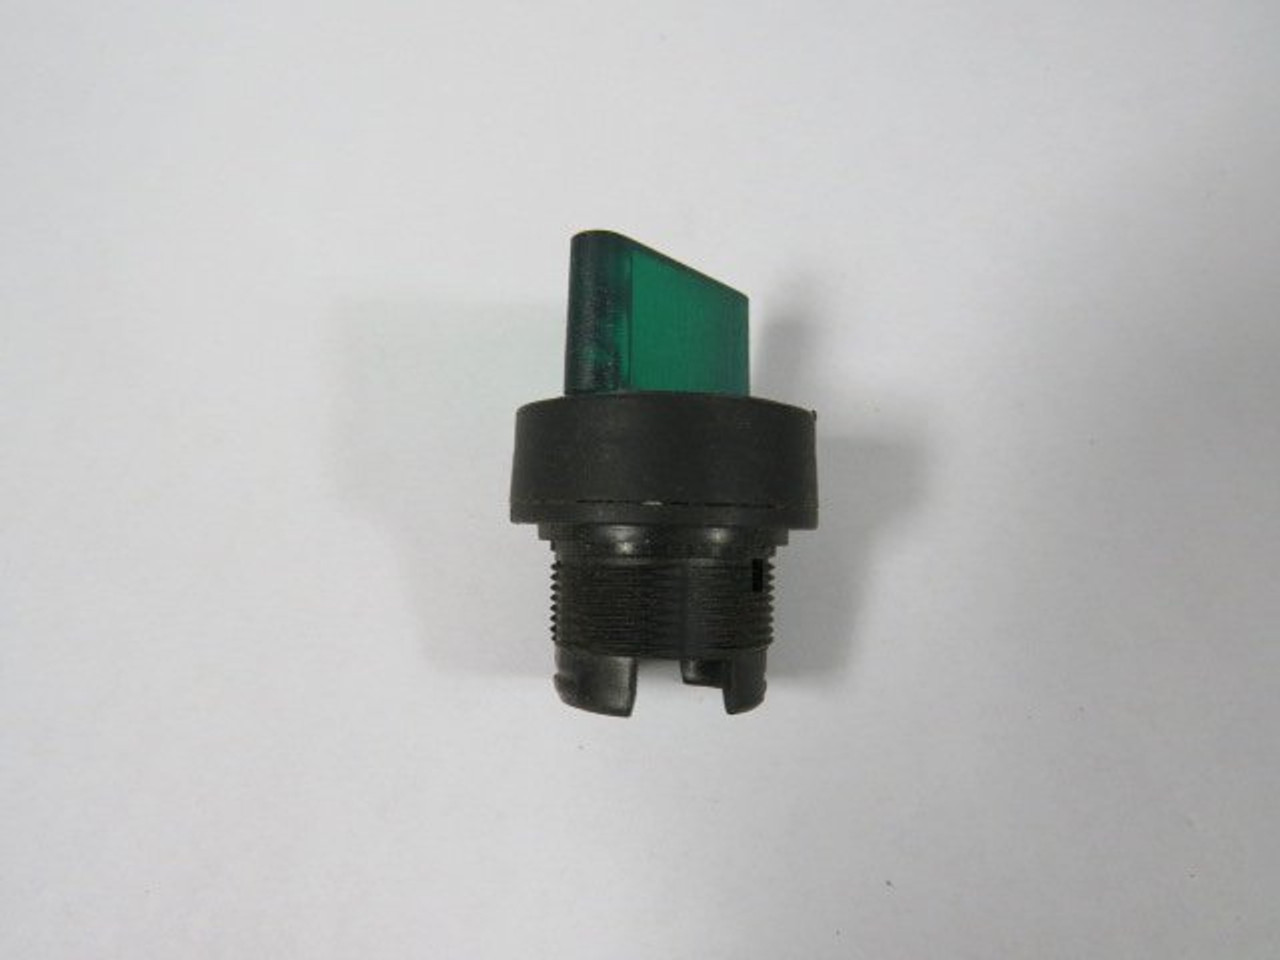 Telemecanique ZB5-AK1233 Green Selector Switch Operator Only 2-Position USED